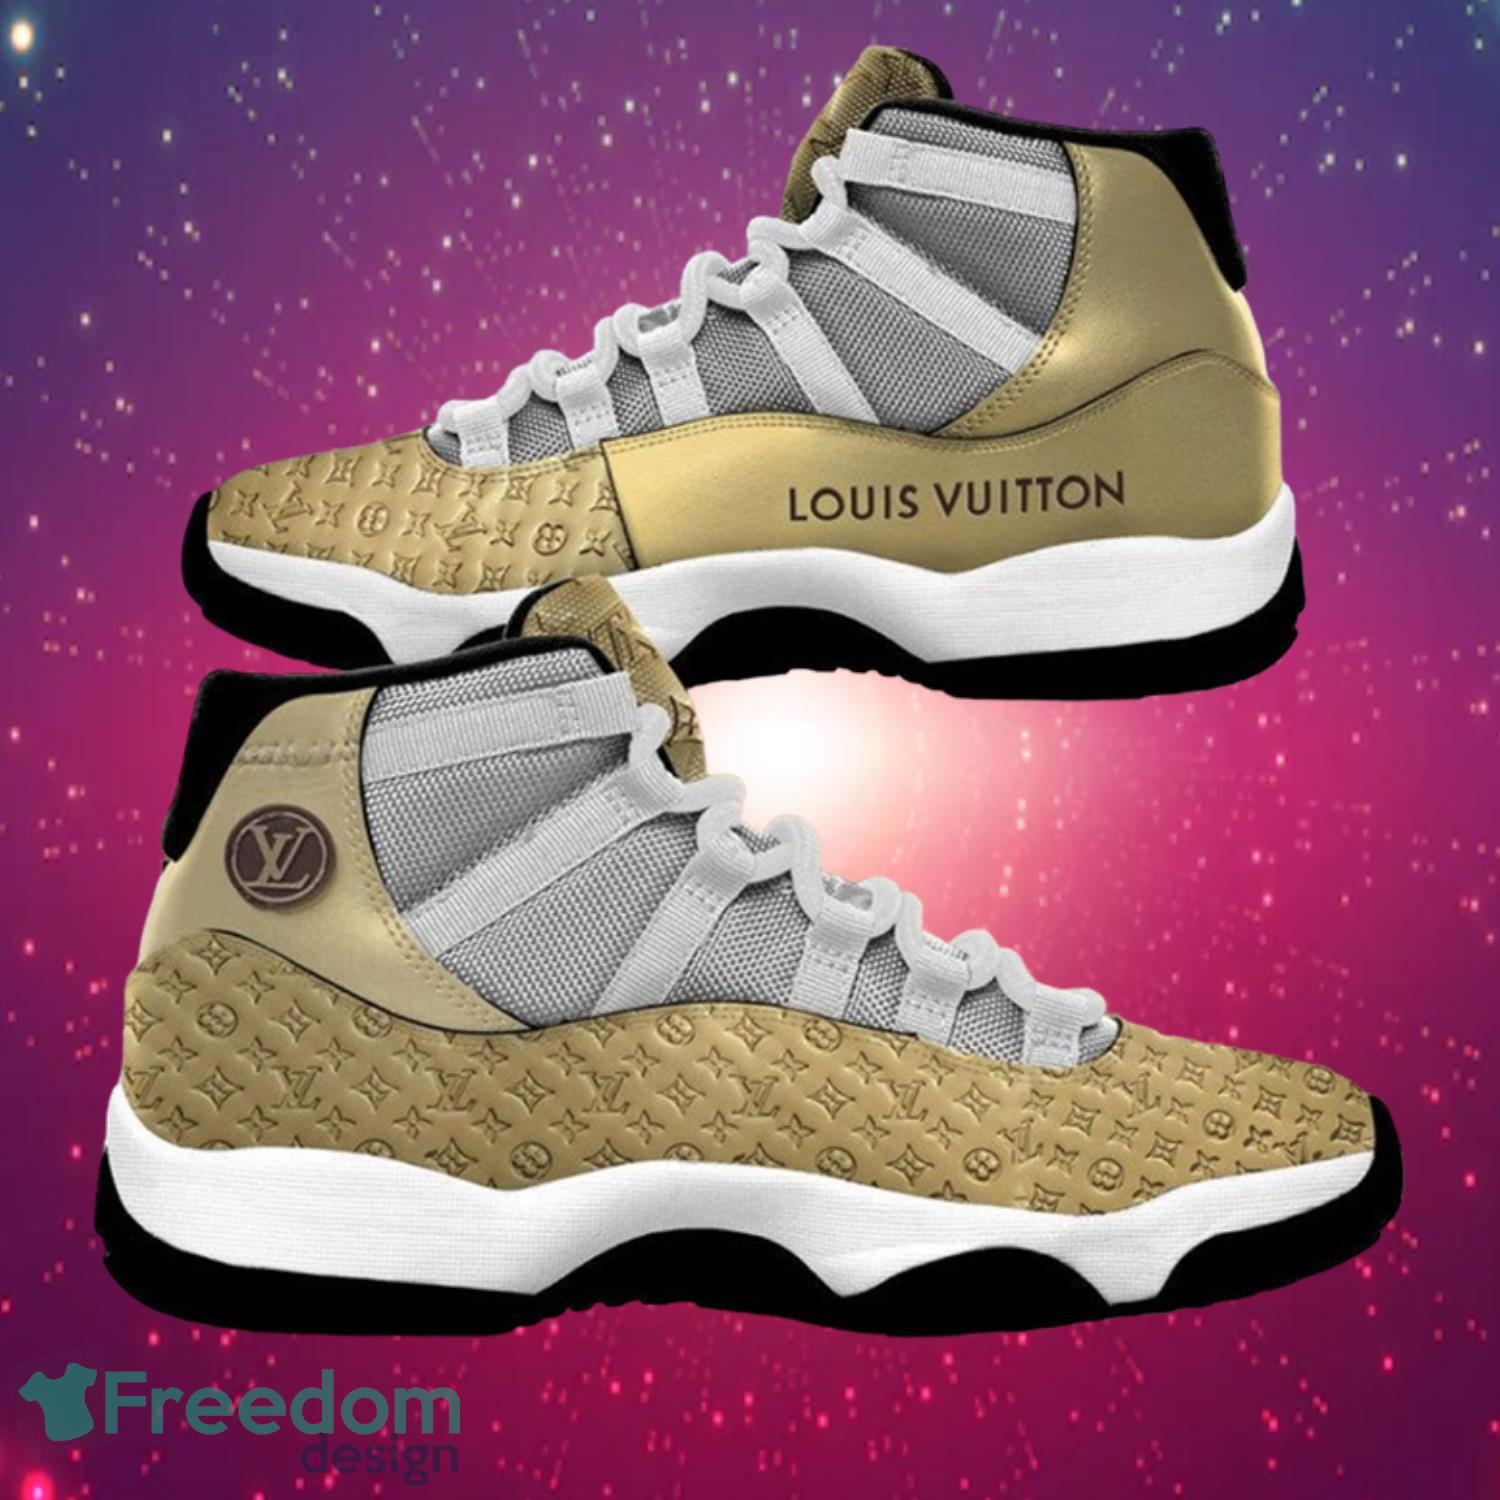 Luxury on Your Feet with Louis Vuitton and Gucci Air Jordan 11